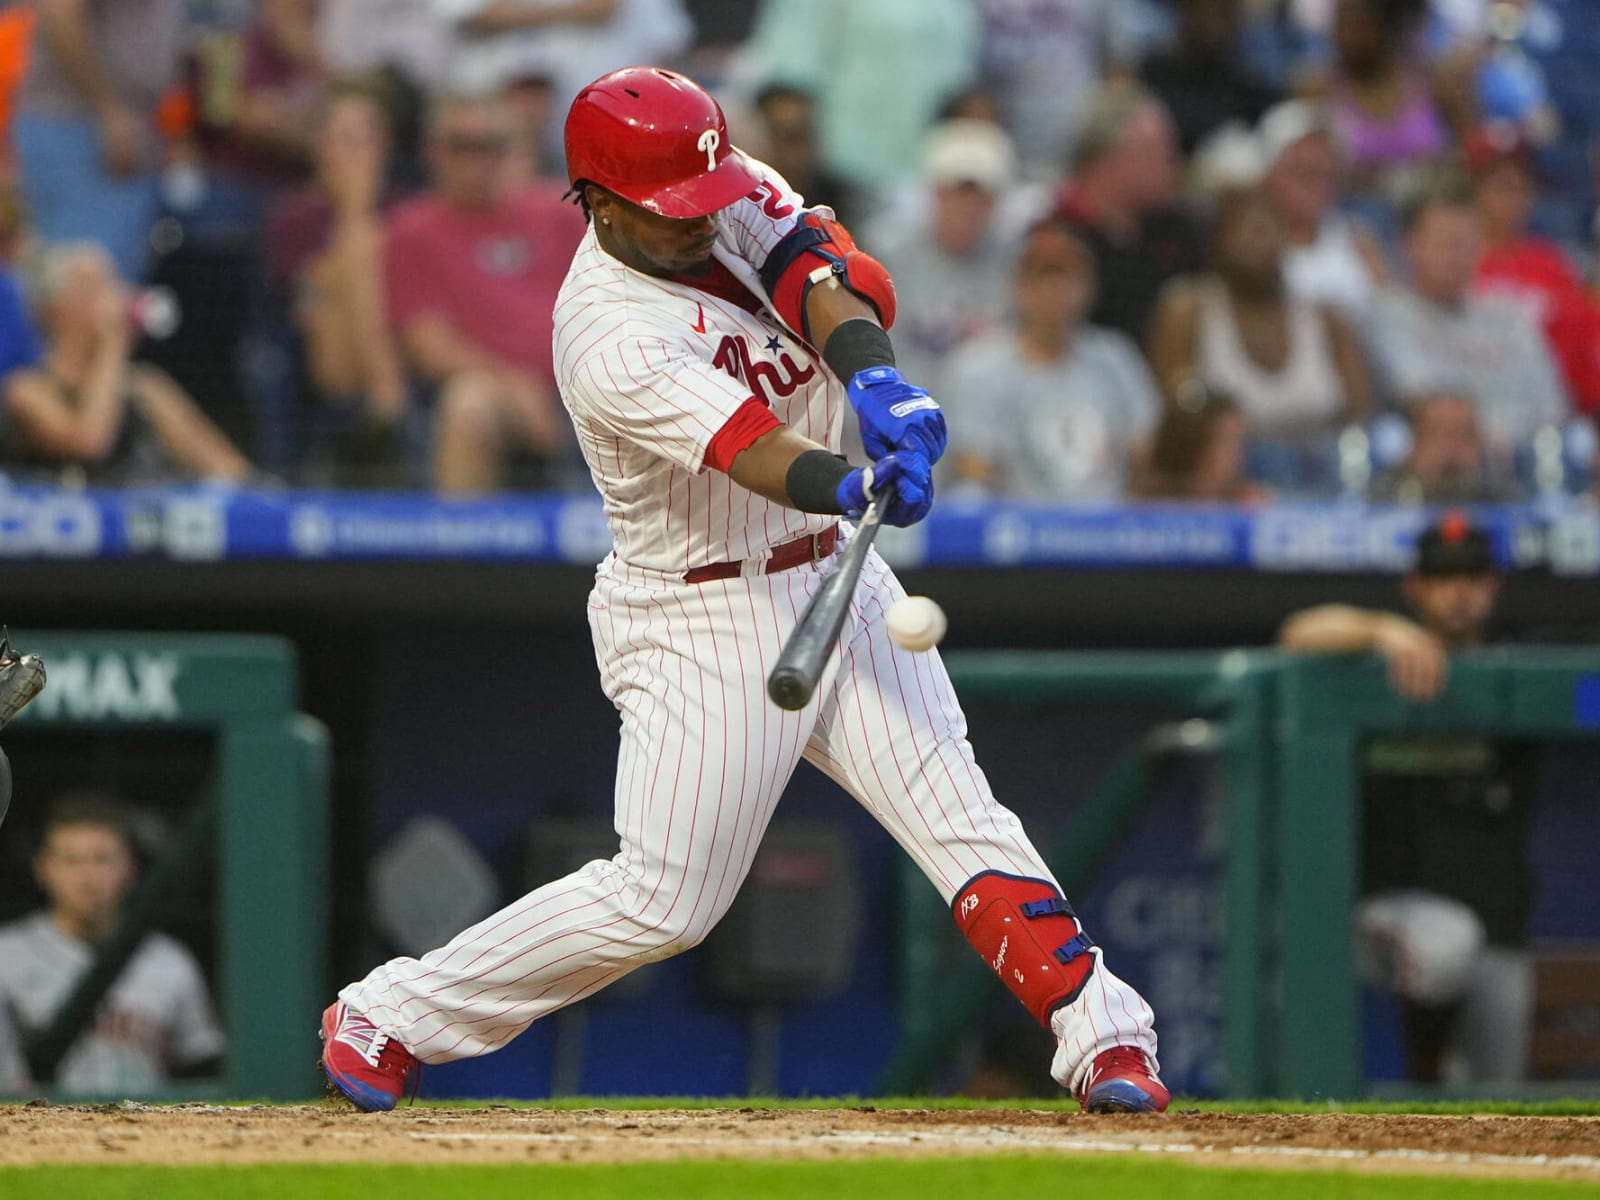 Jean Segura suffers finger injury in Phillies' brutal loss to Giants